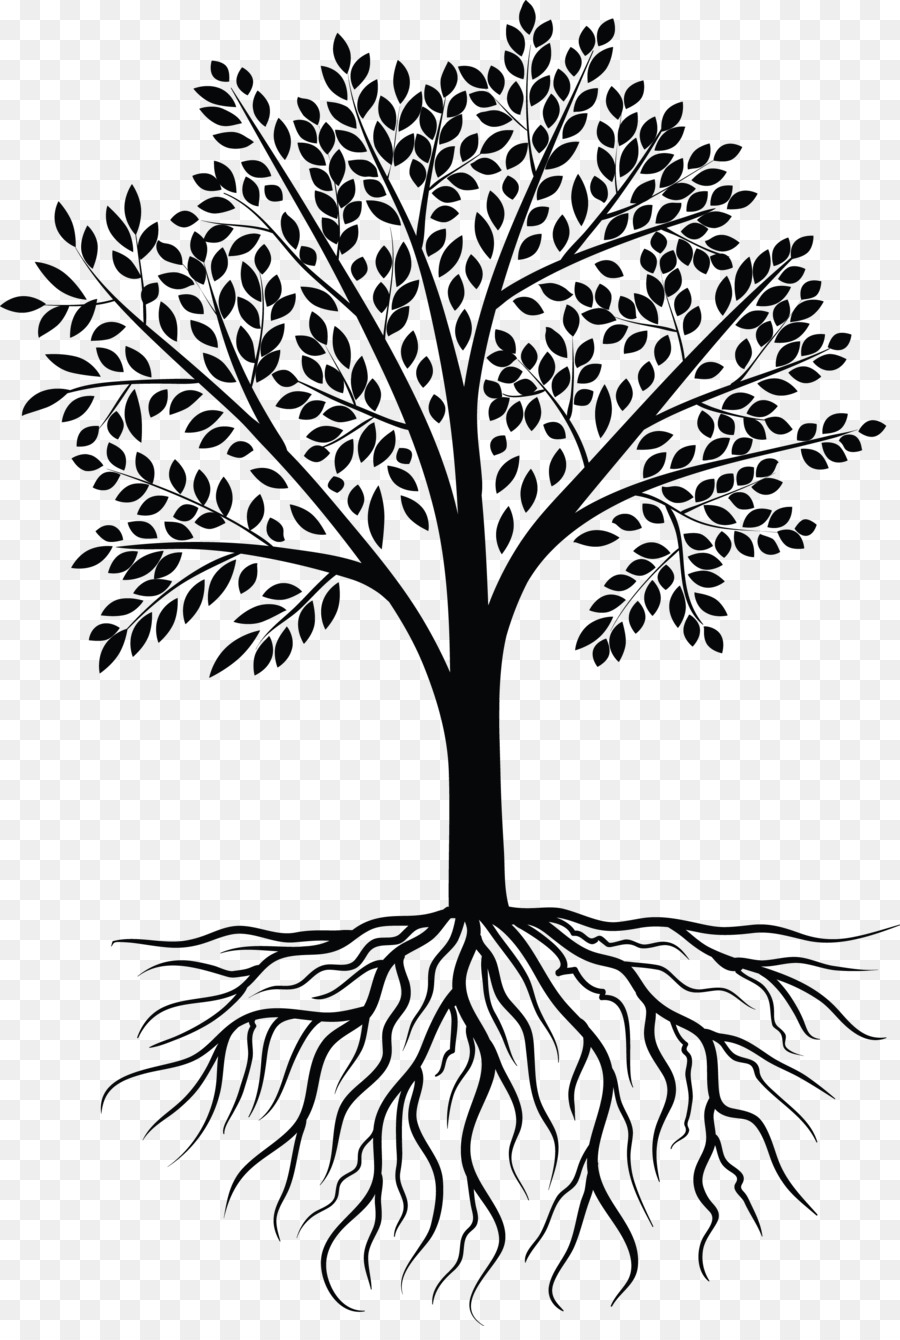 Tree Photography Clip art - tree vector png download - 2264*3335 - Free Transparent Tree png Download.